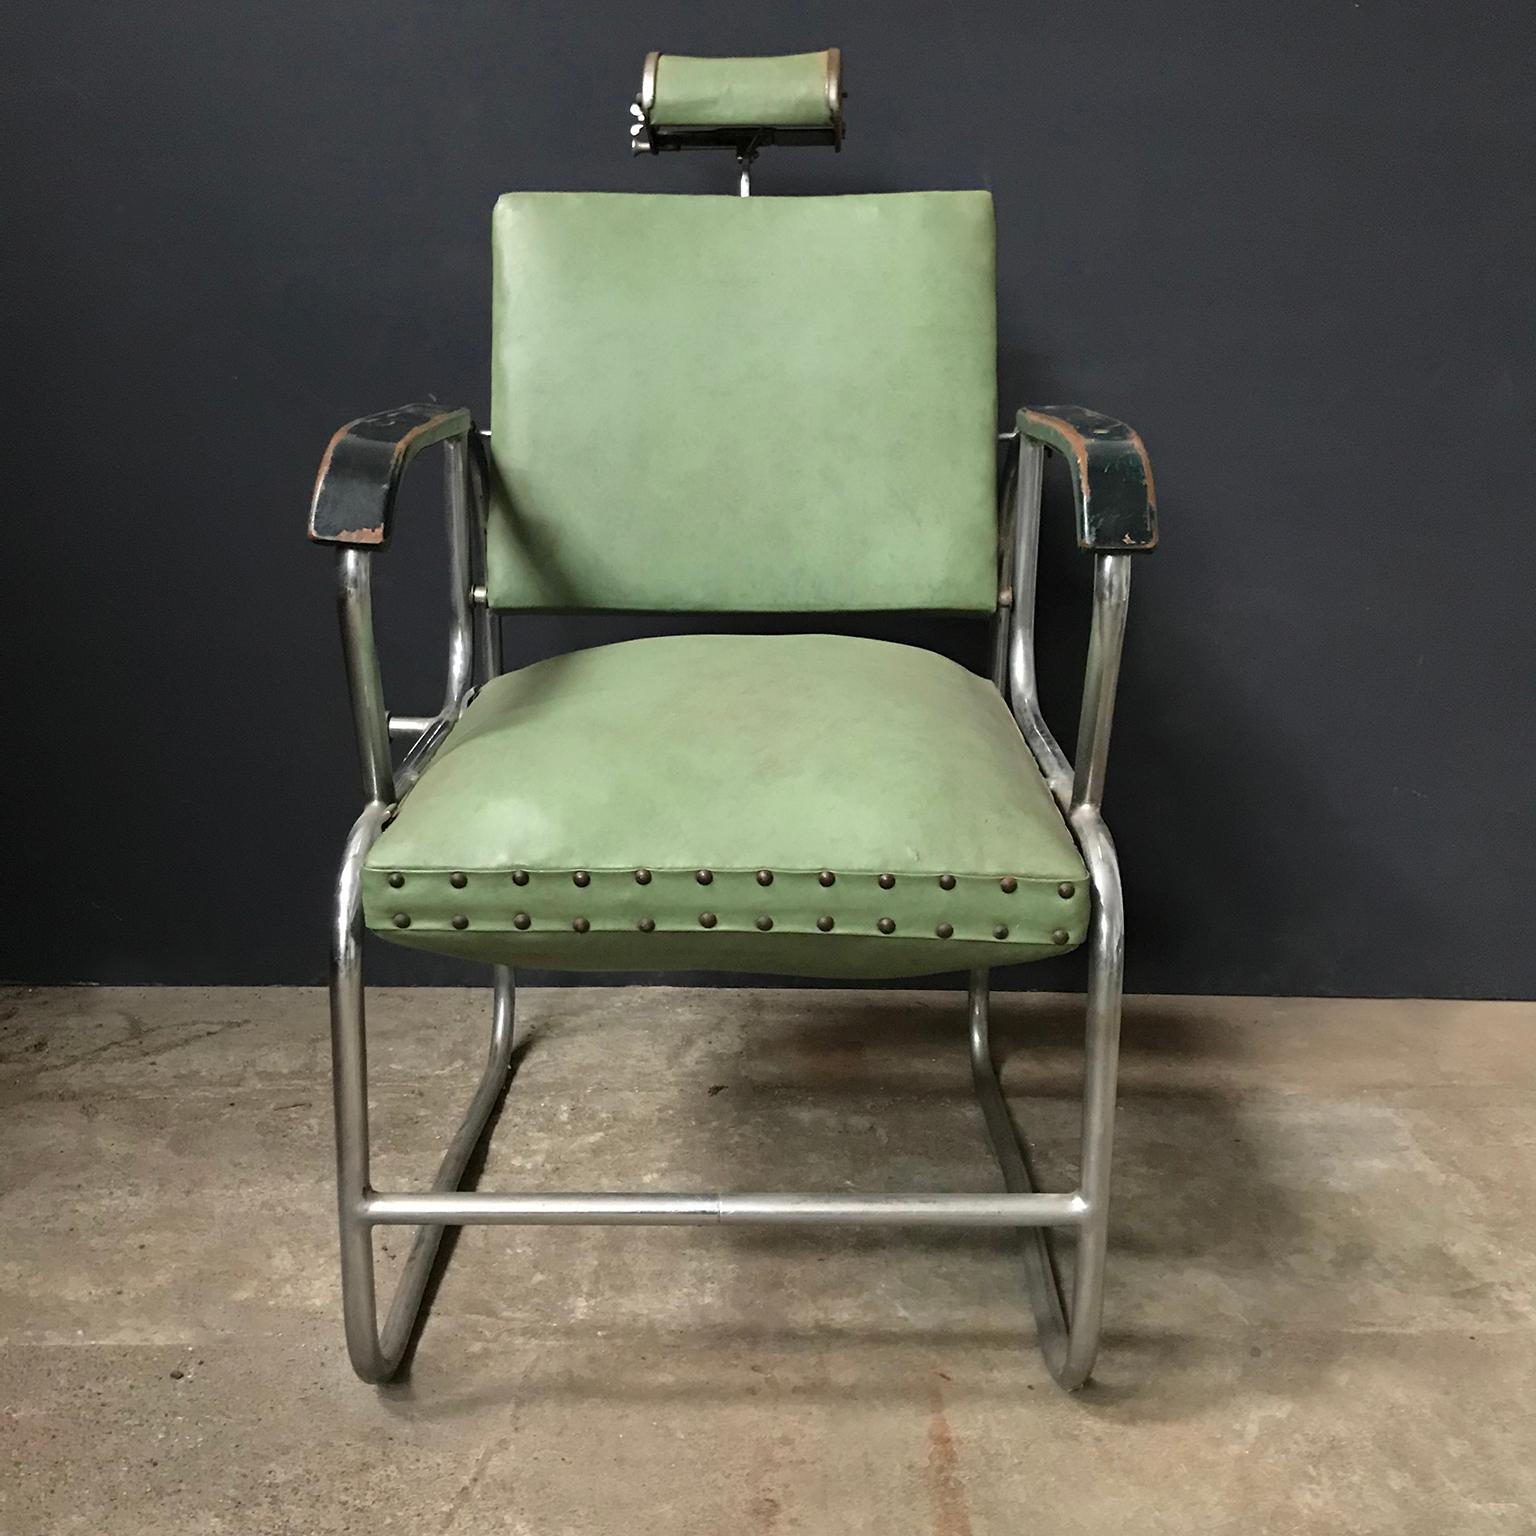 Original Barber Chair with Original Green Upholstery, Rotated Seat, circa 1950 3